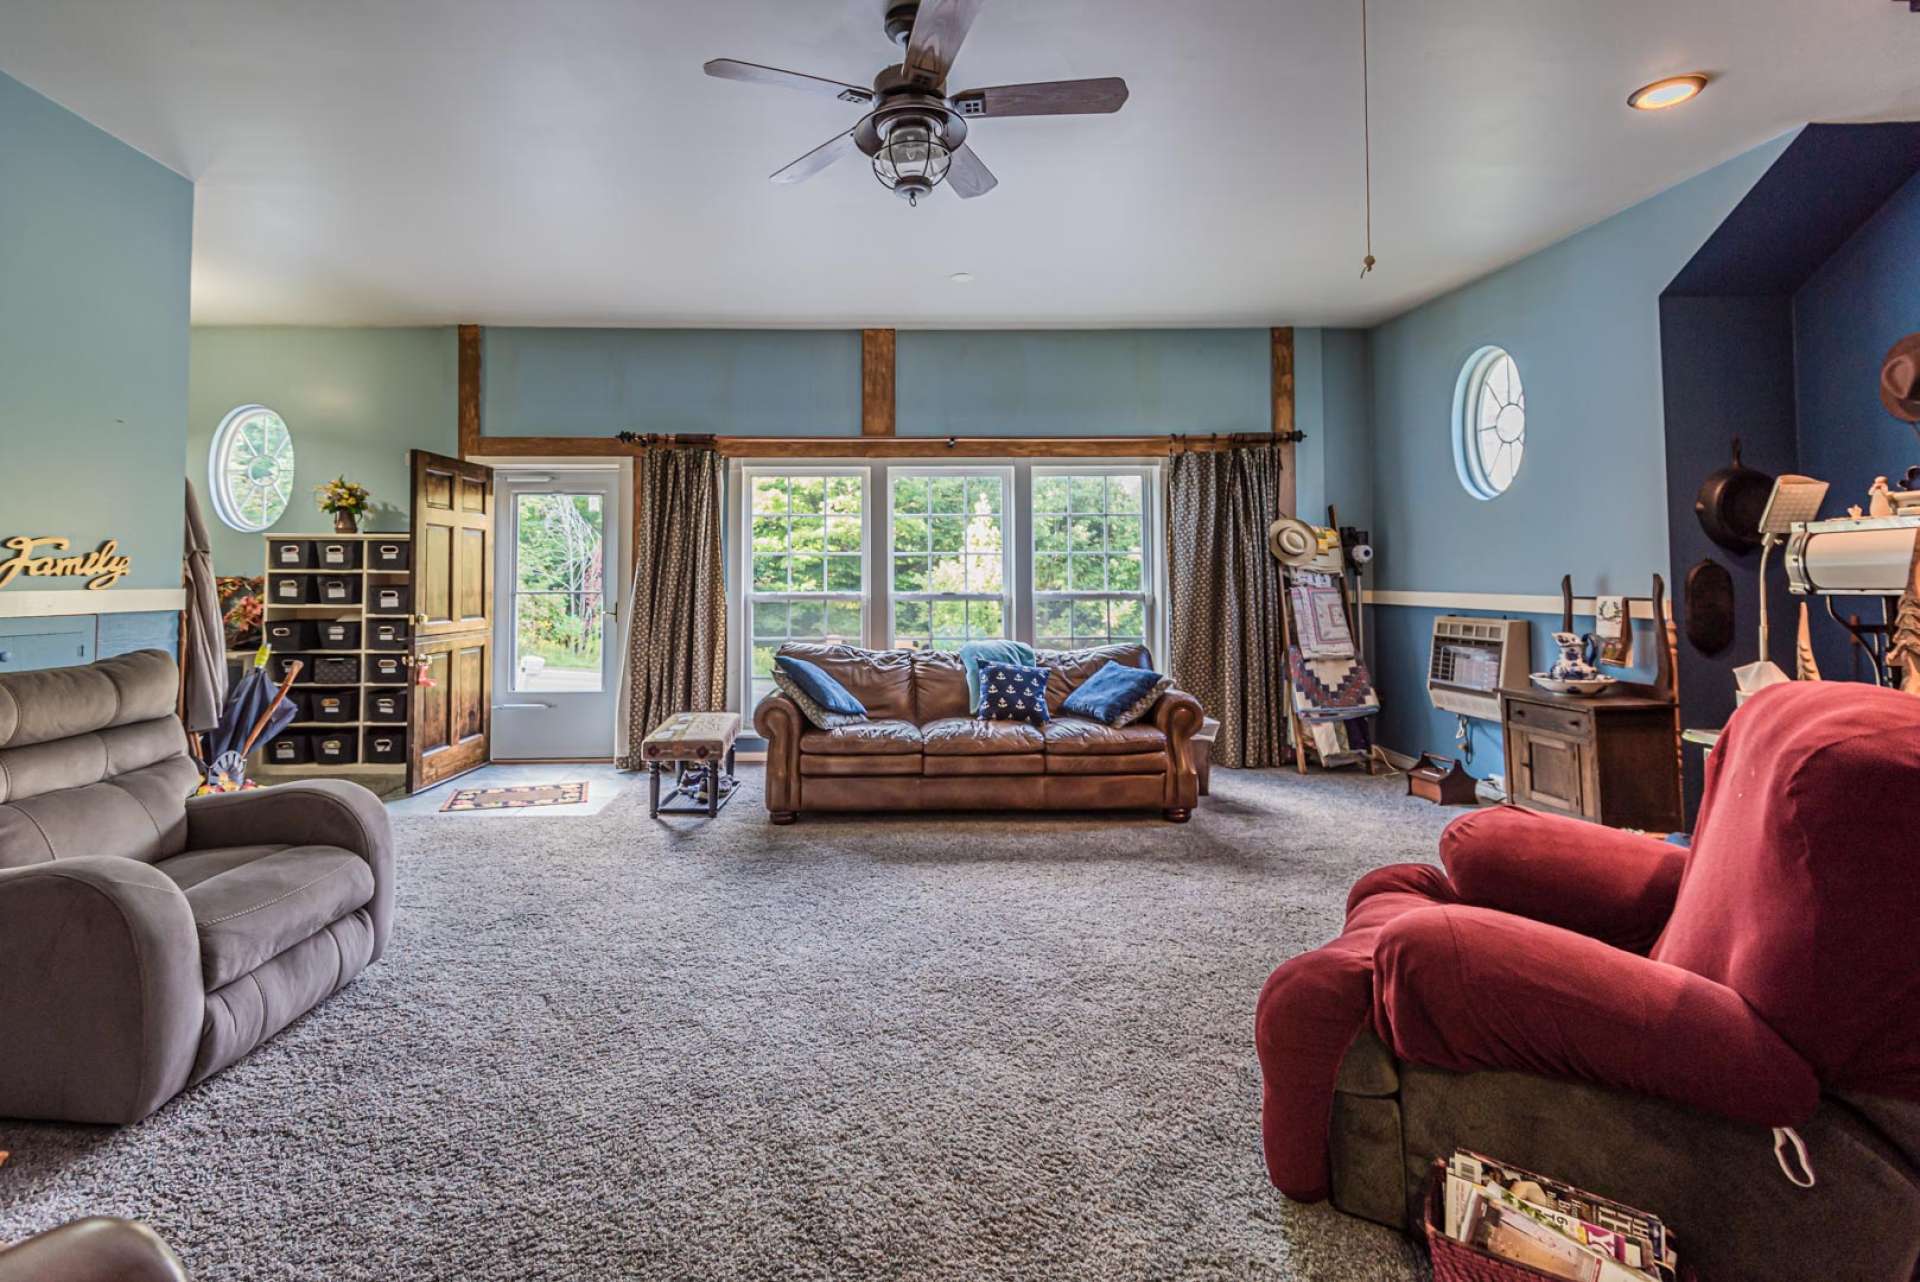 This large den area provides plenty of room to relax with family. Also notice the large windows and easy access to the outdoors.